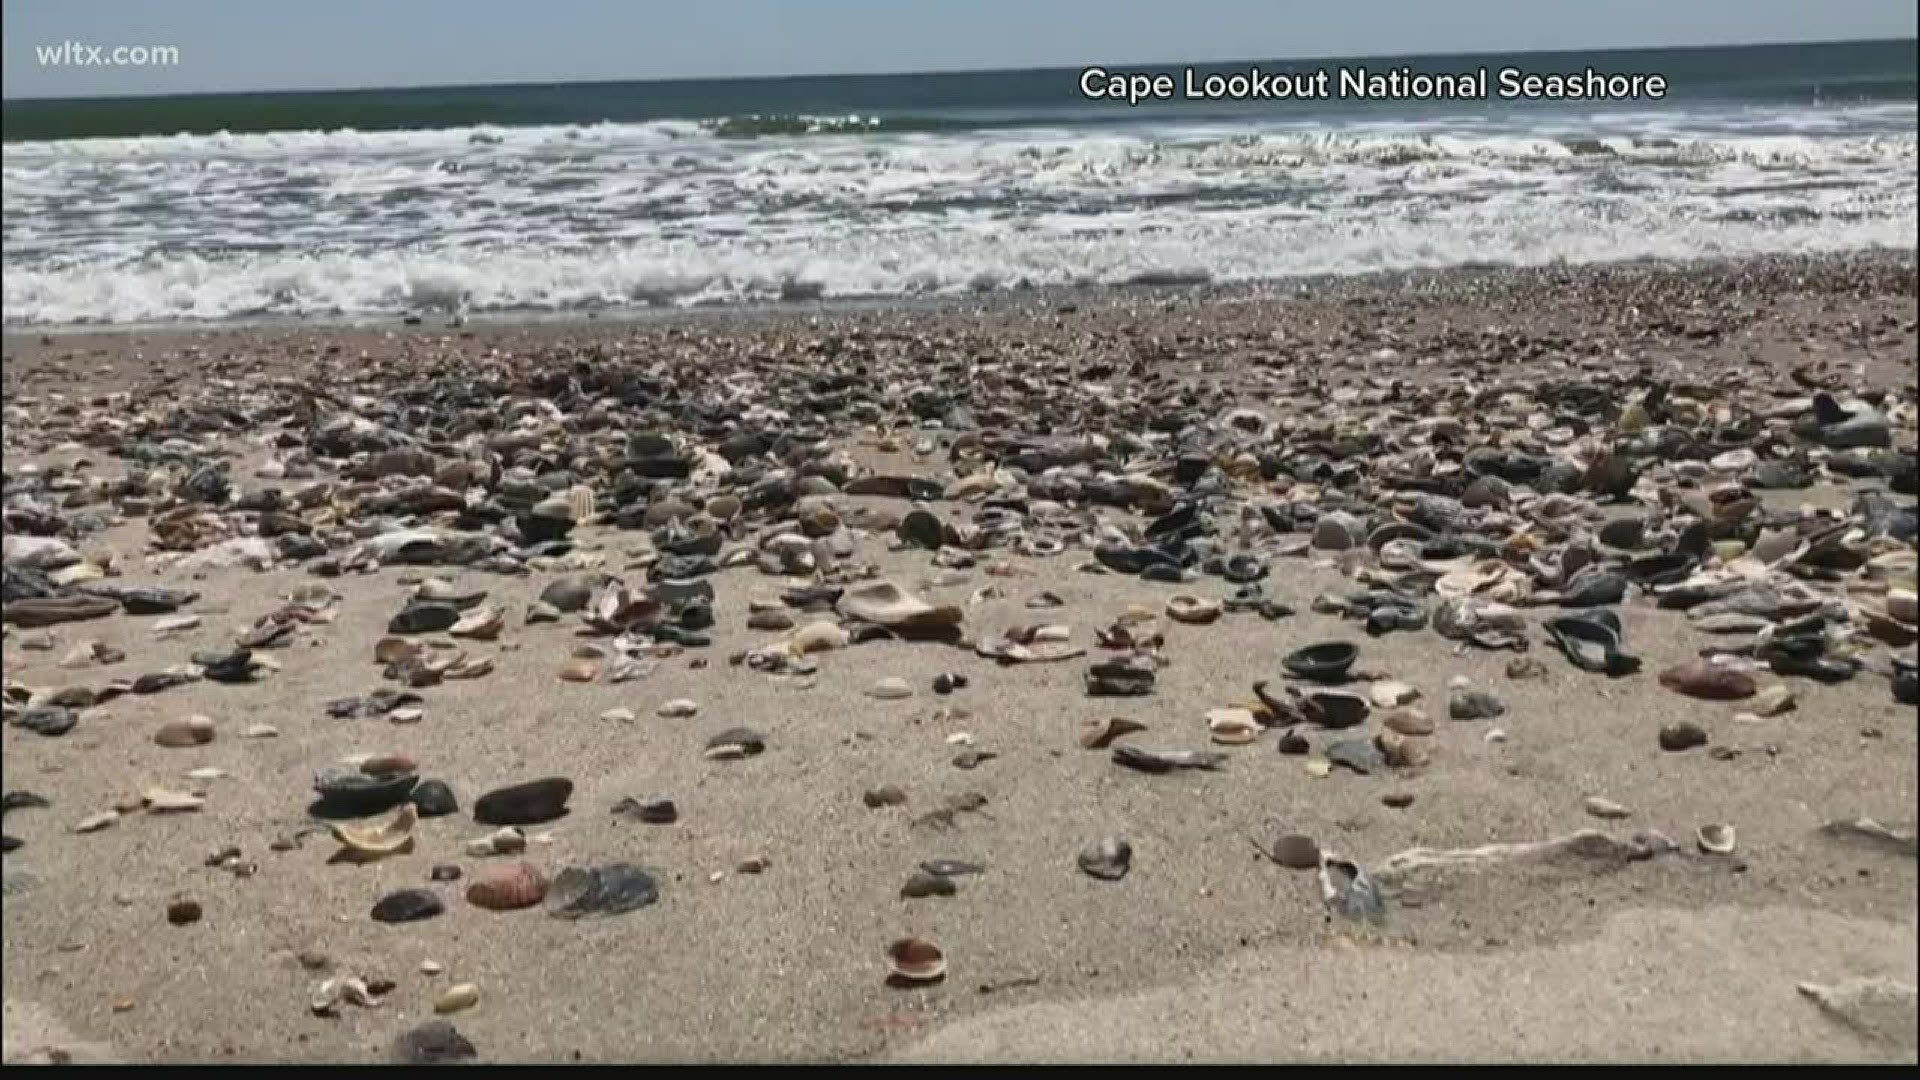 Tons of shells are there for a simple reason ... there are no tourists to come pick them up.